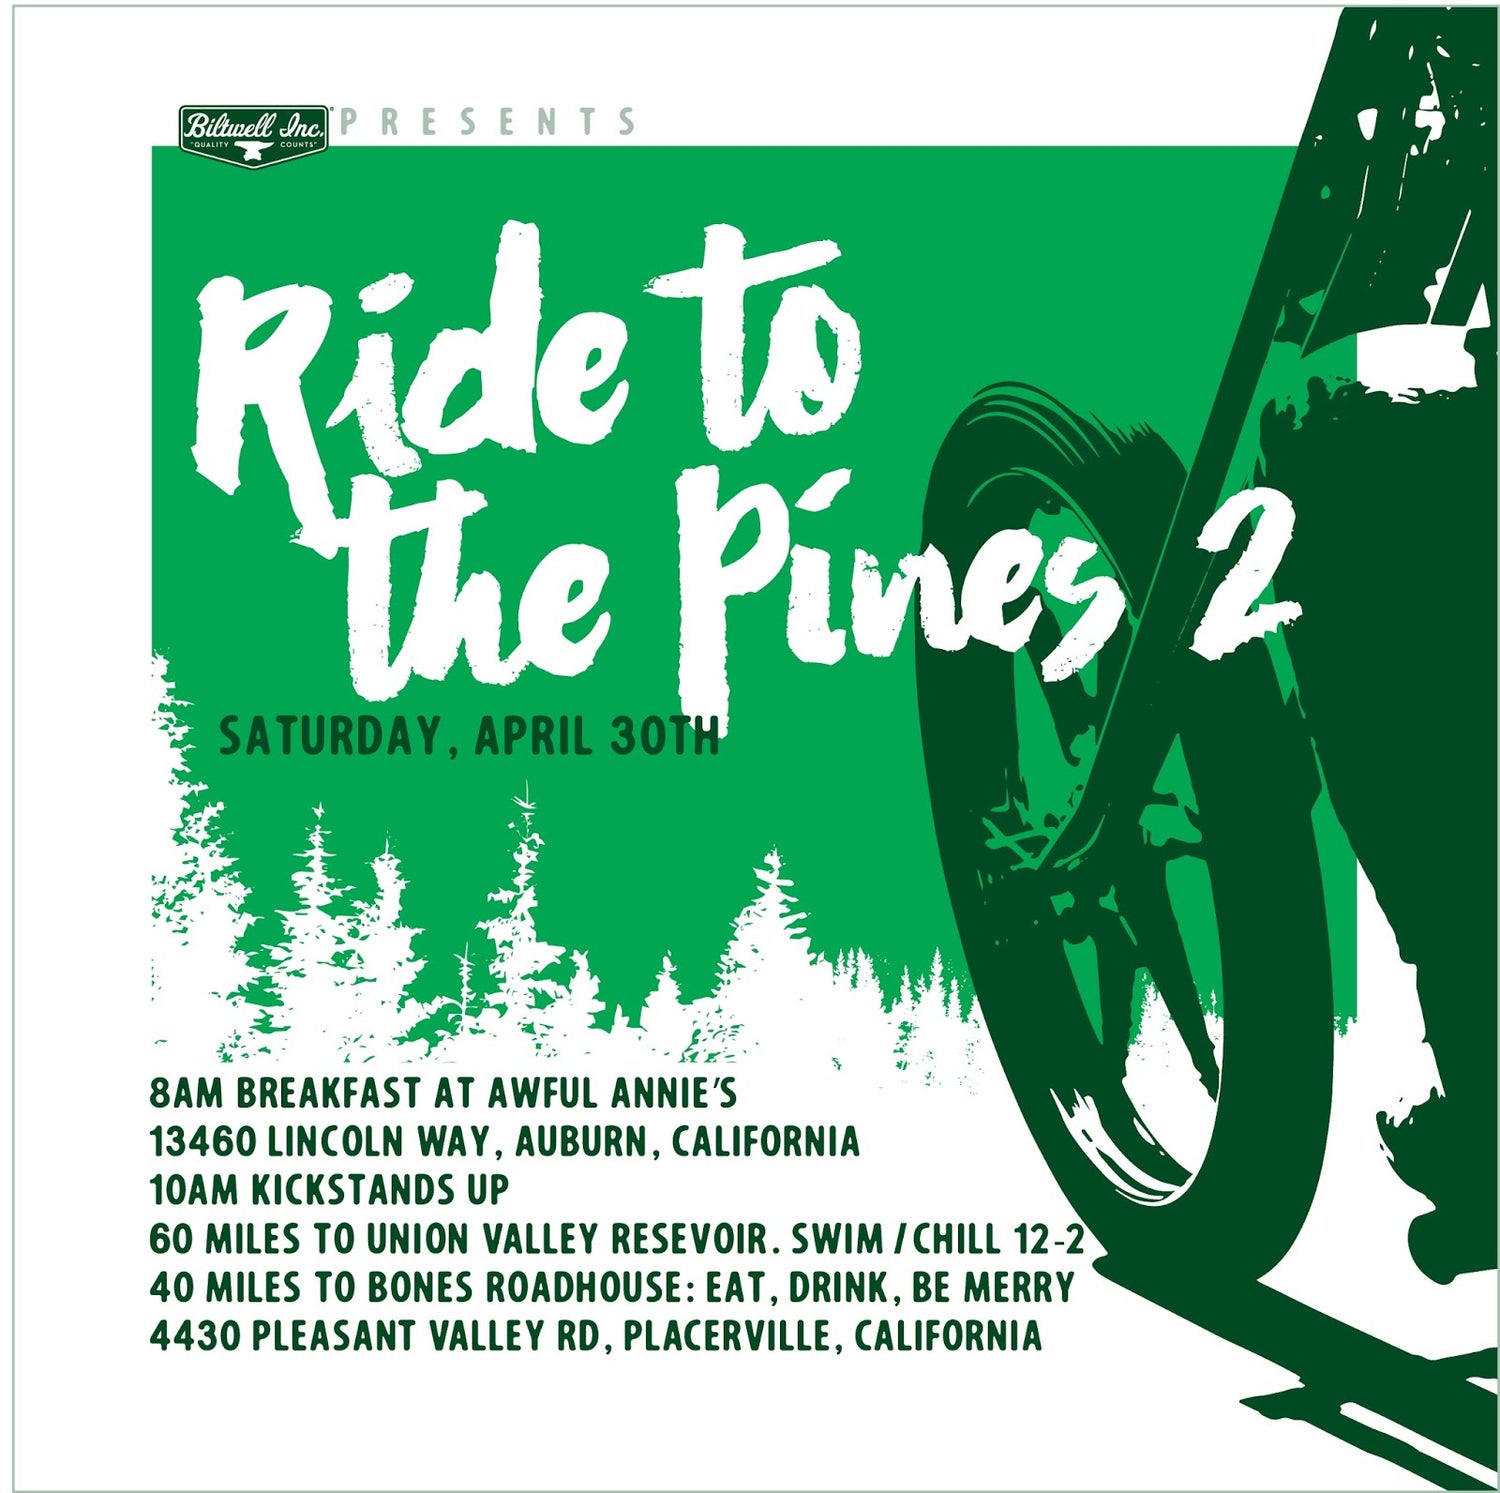 Ride to the Pines 2